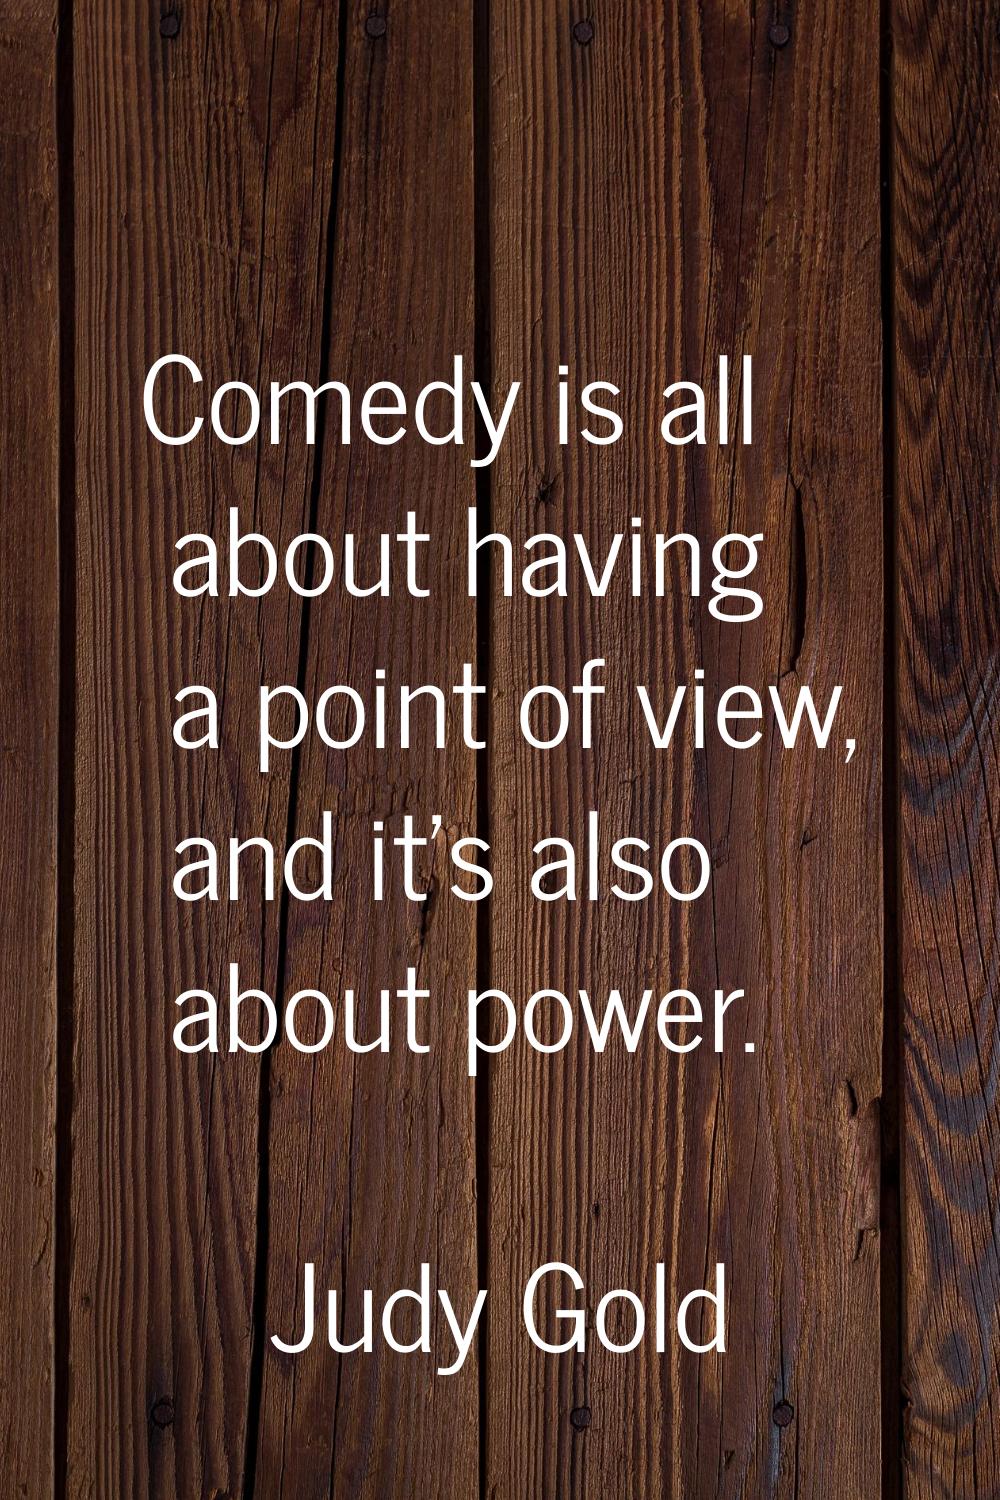 Comedy is all about having a point of view, and it's also about power.